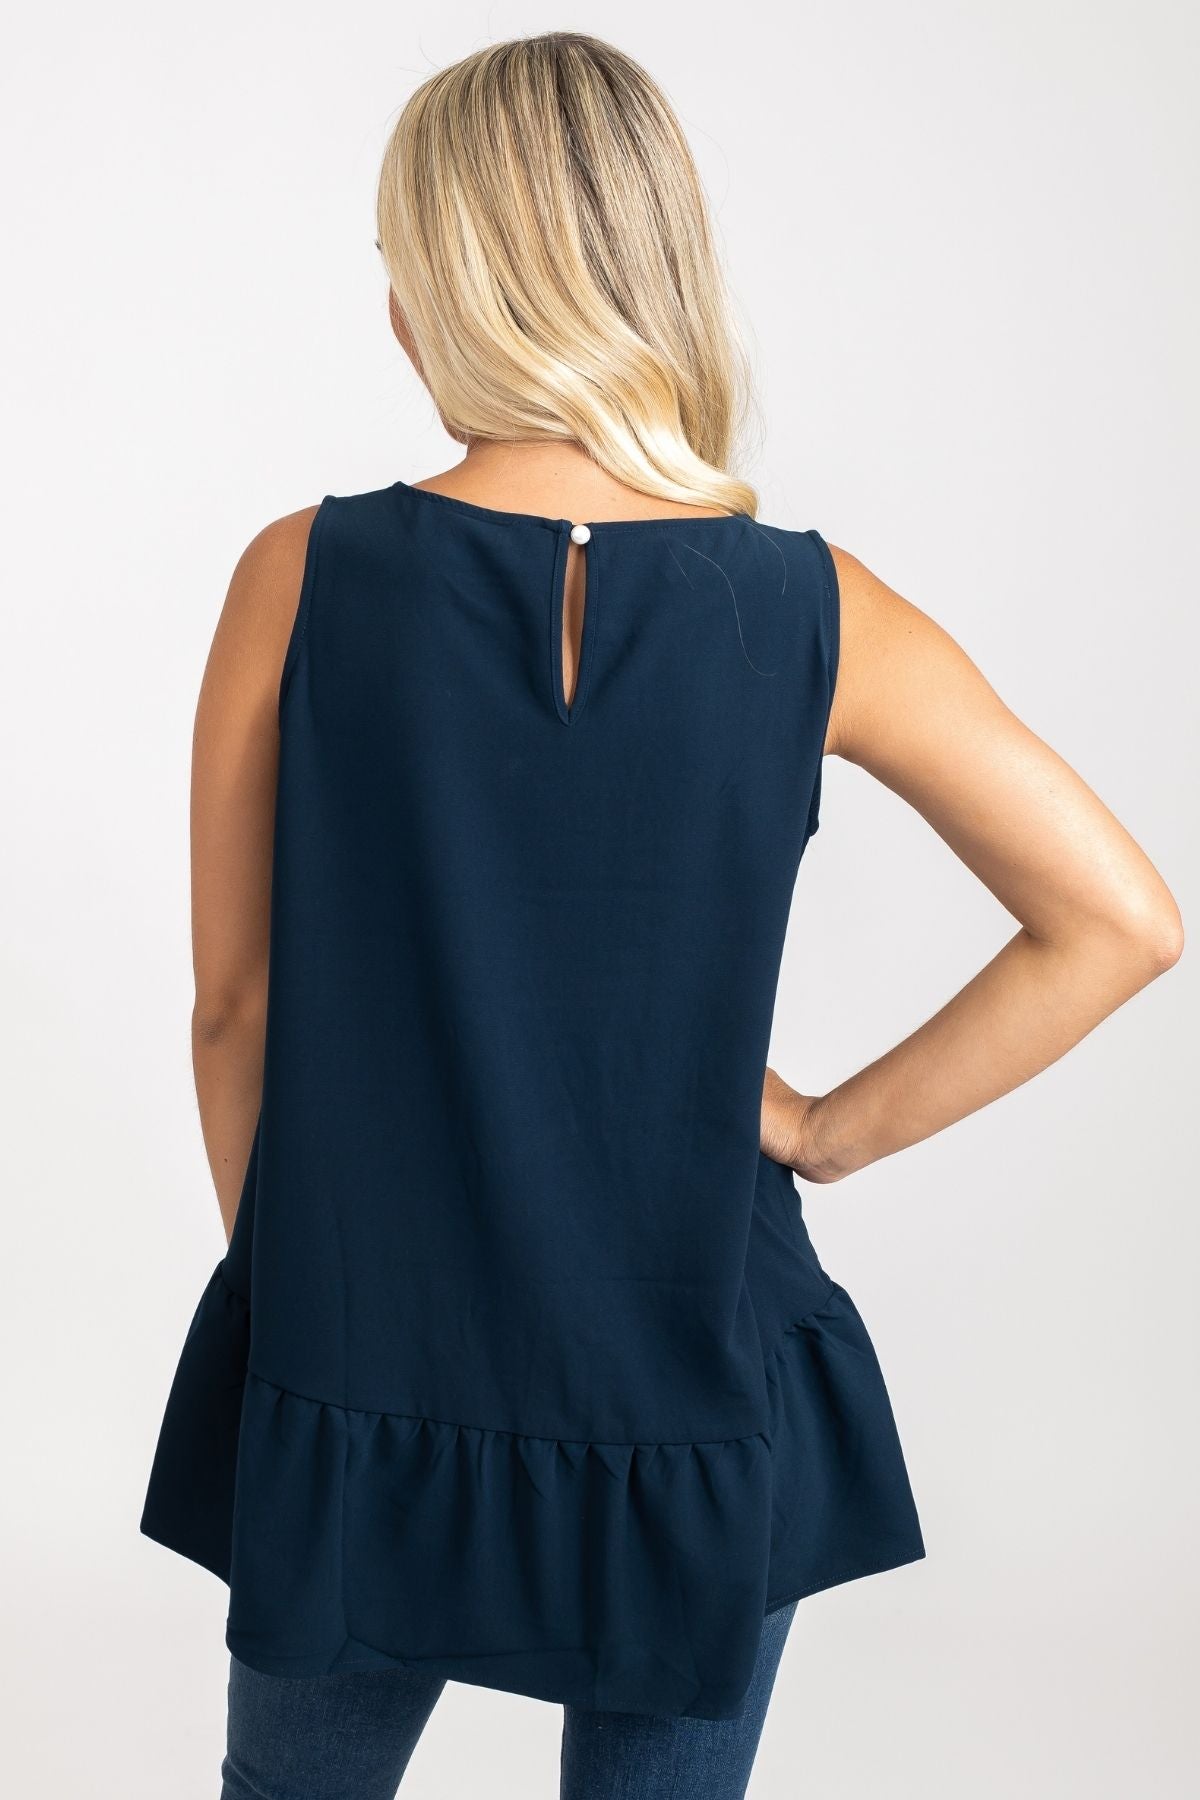 Navy High-Quality Material Boutique Tank Tops for Women